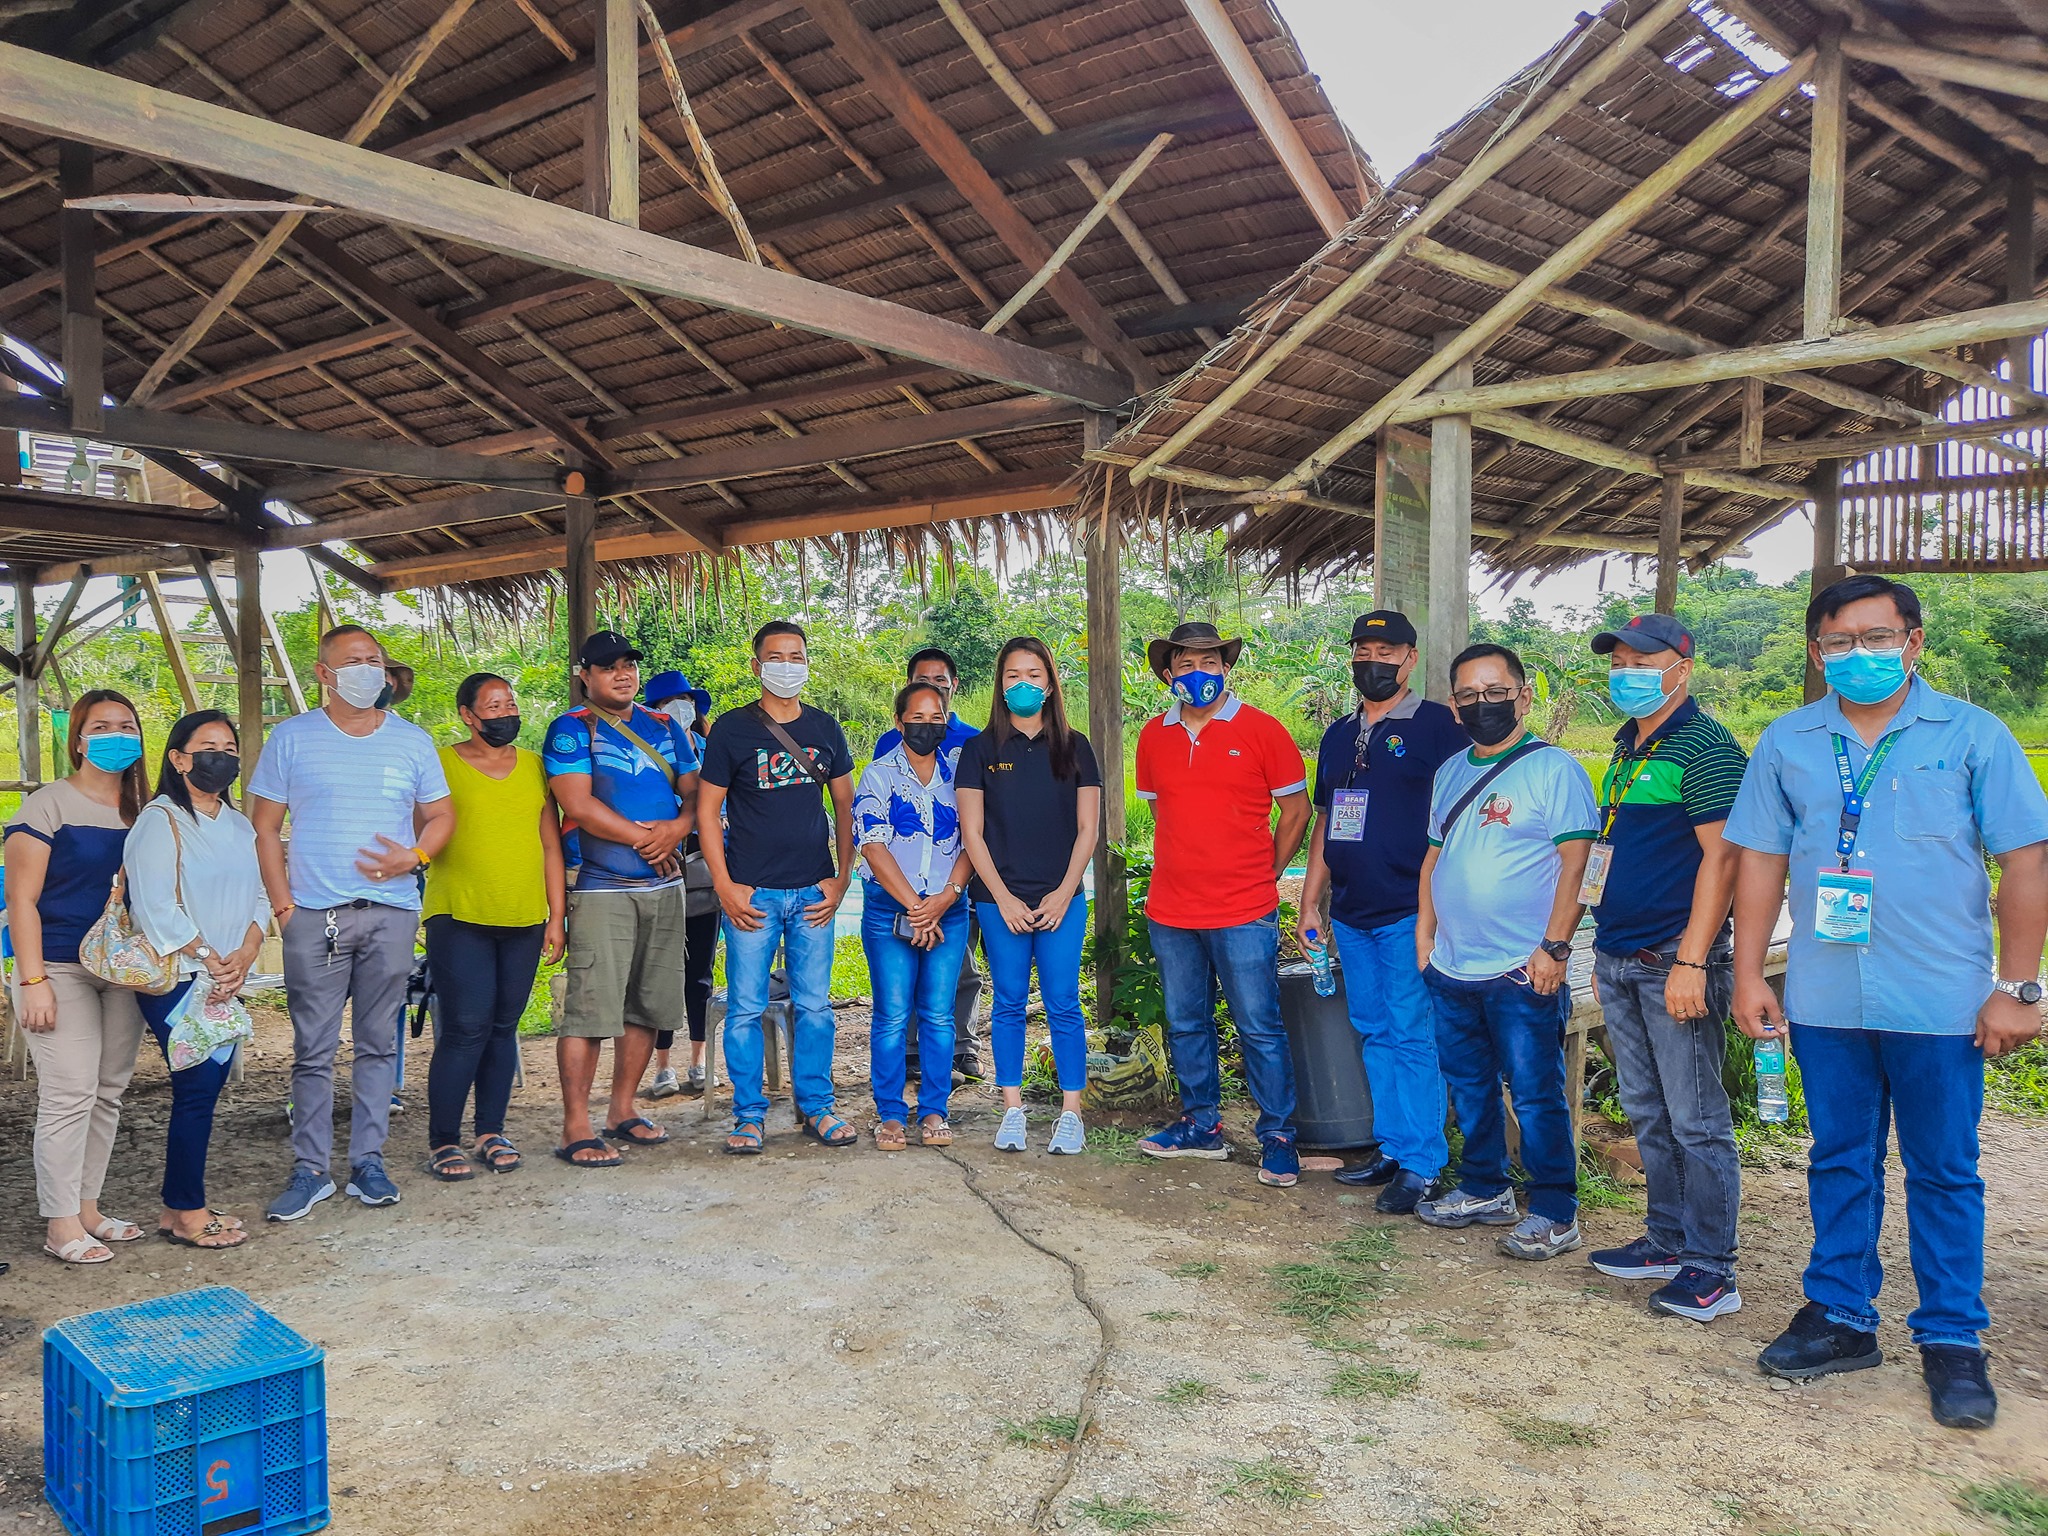 Agusan del Sur farmers and fishers showcase livelihood to SAAD Director